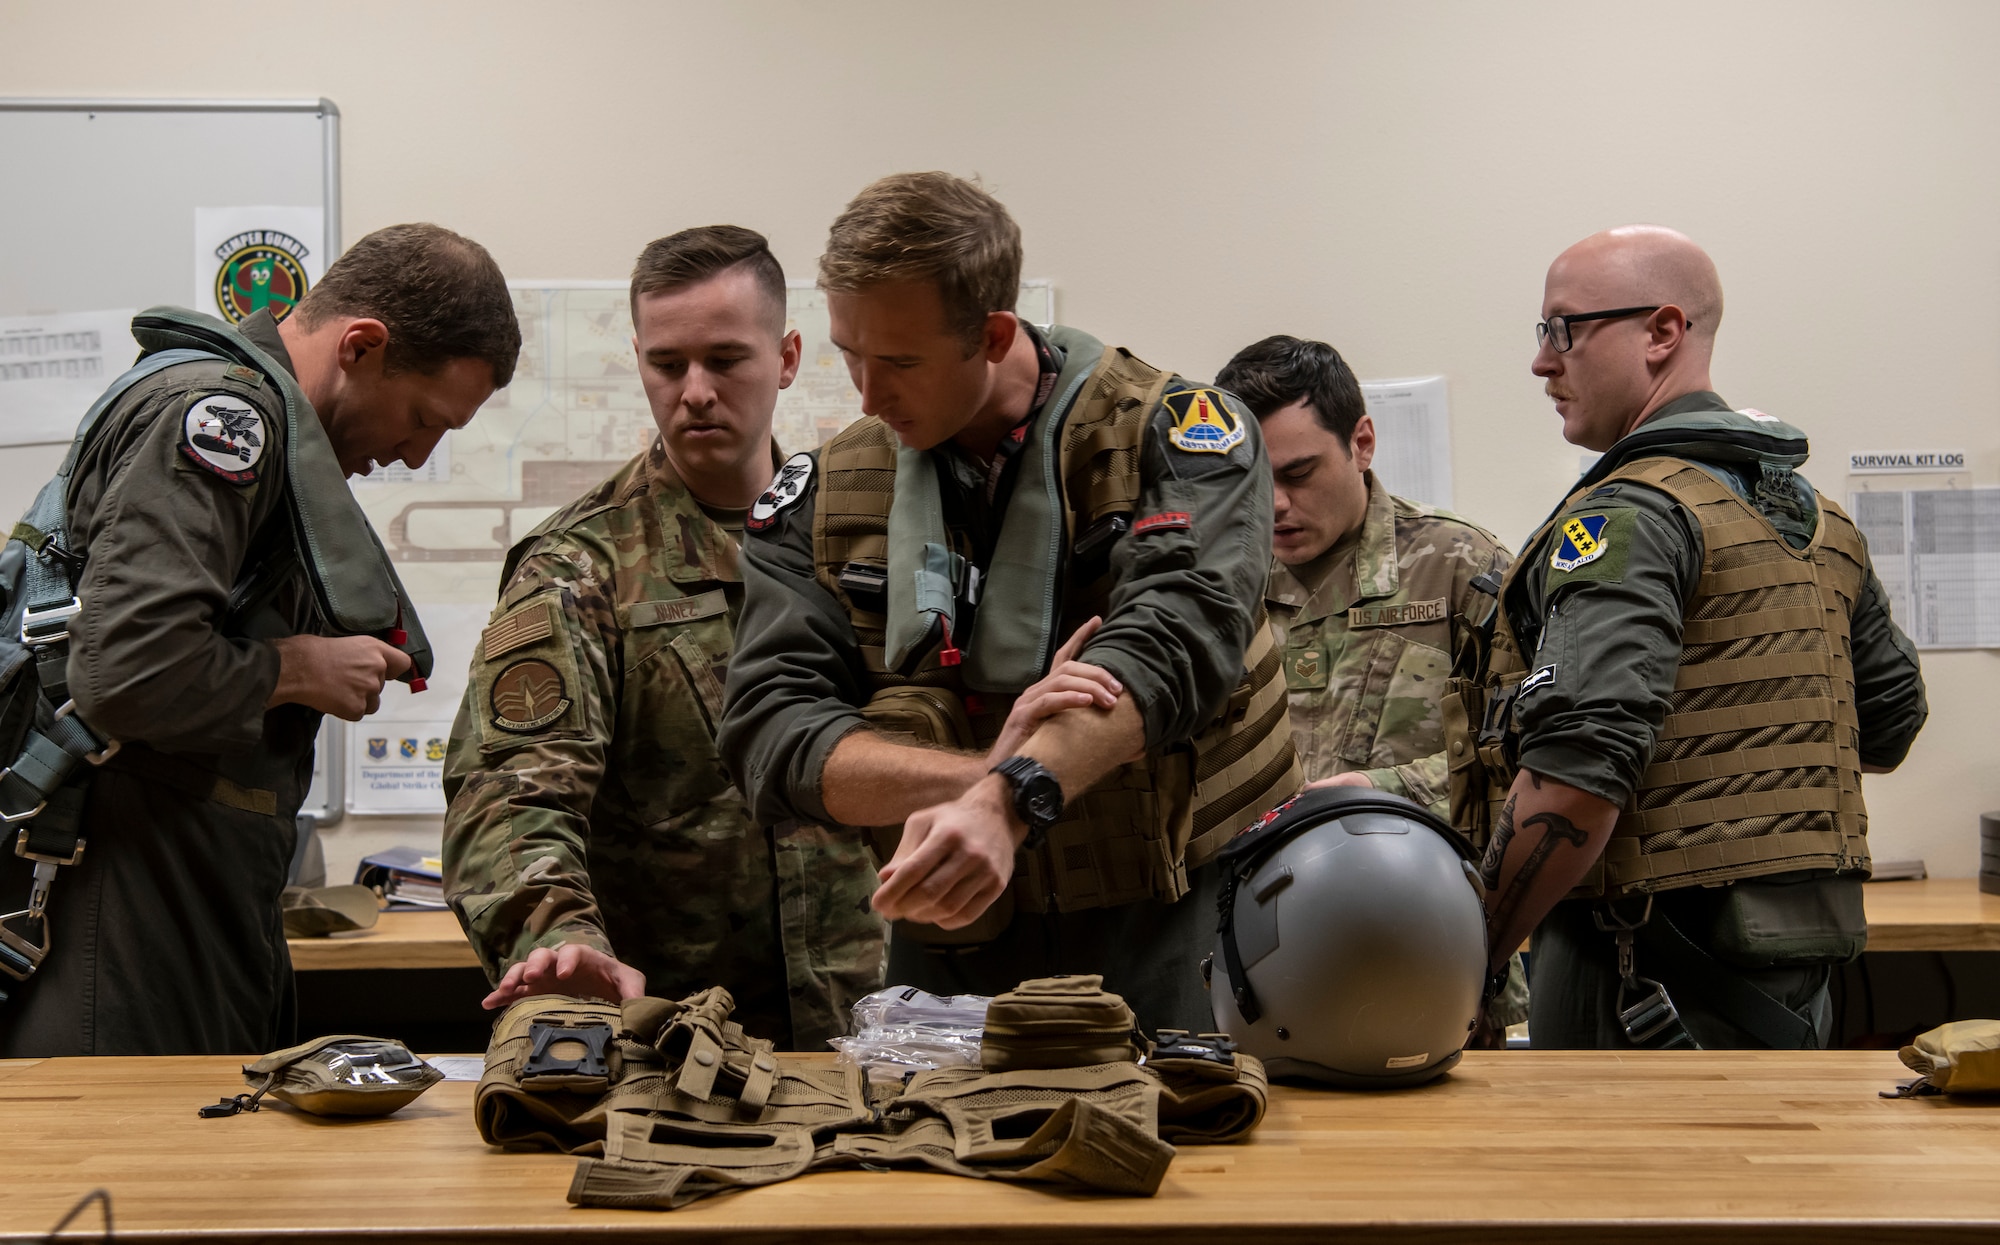 U.S. Air Force pilots and weapons system officers, assigned to the 307th and 7th Bomb Wings, gear up before flight at Dyess Air Force Base, Texas Sept. 7th, 2022. During their mission, crews conducted counter illicit Chinese fishing operations off the coast of Guatemala. (U.S. Air Force photo by Senior Airman Mercedes Porter)